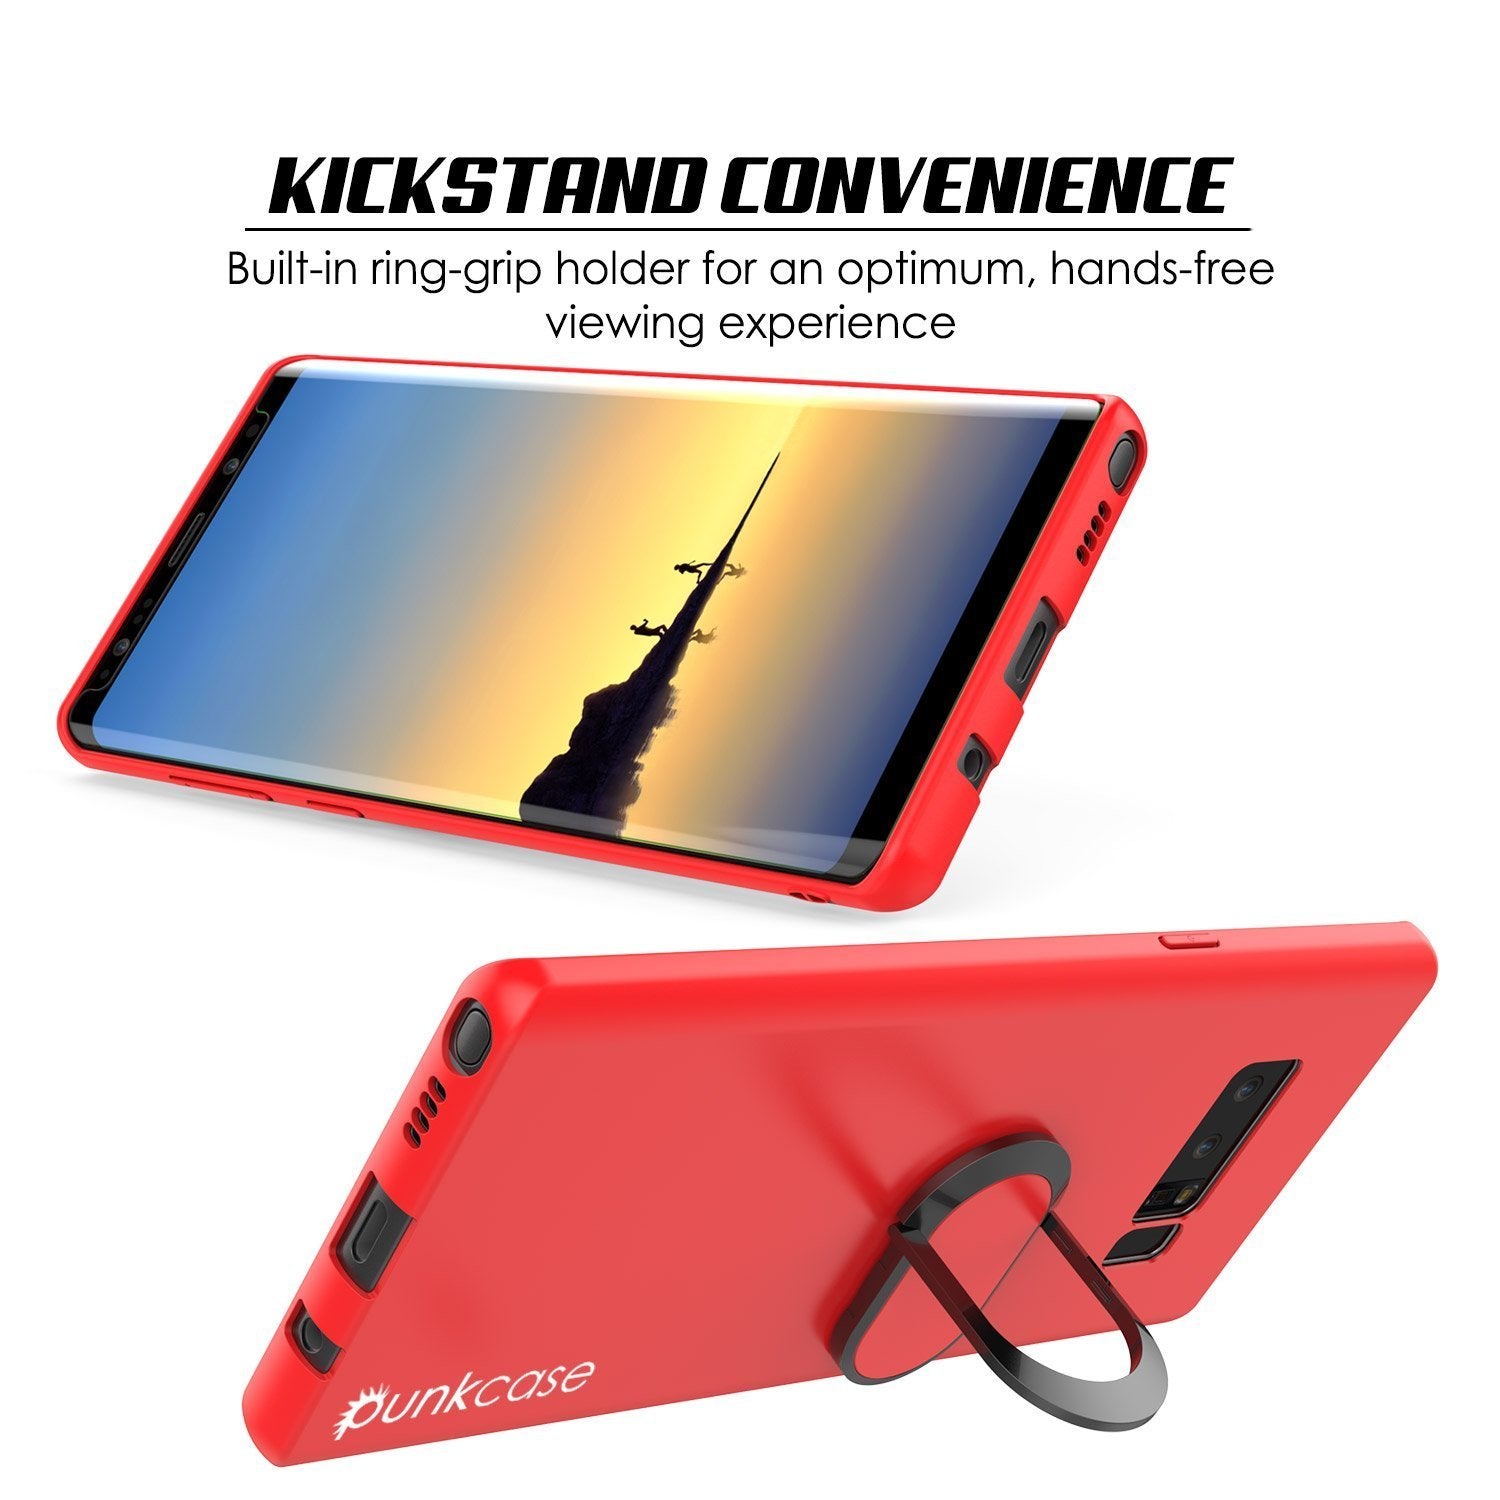 Galaxy Note 8 Ultra Slim Protective Punkcase Magnetix Case [Red]